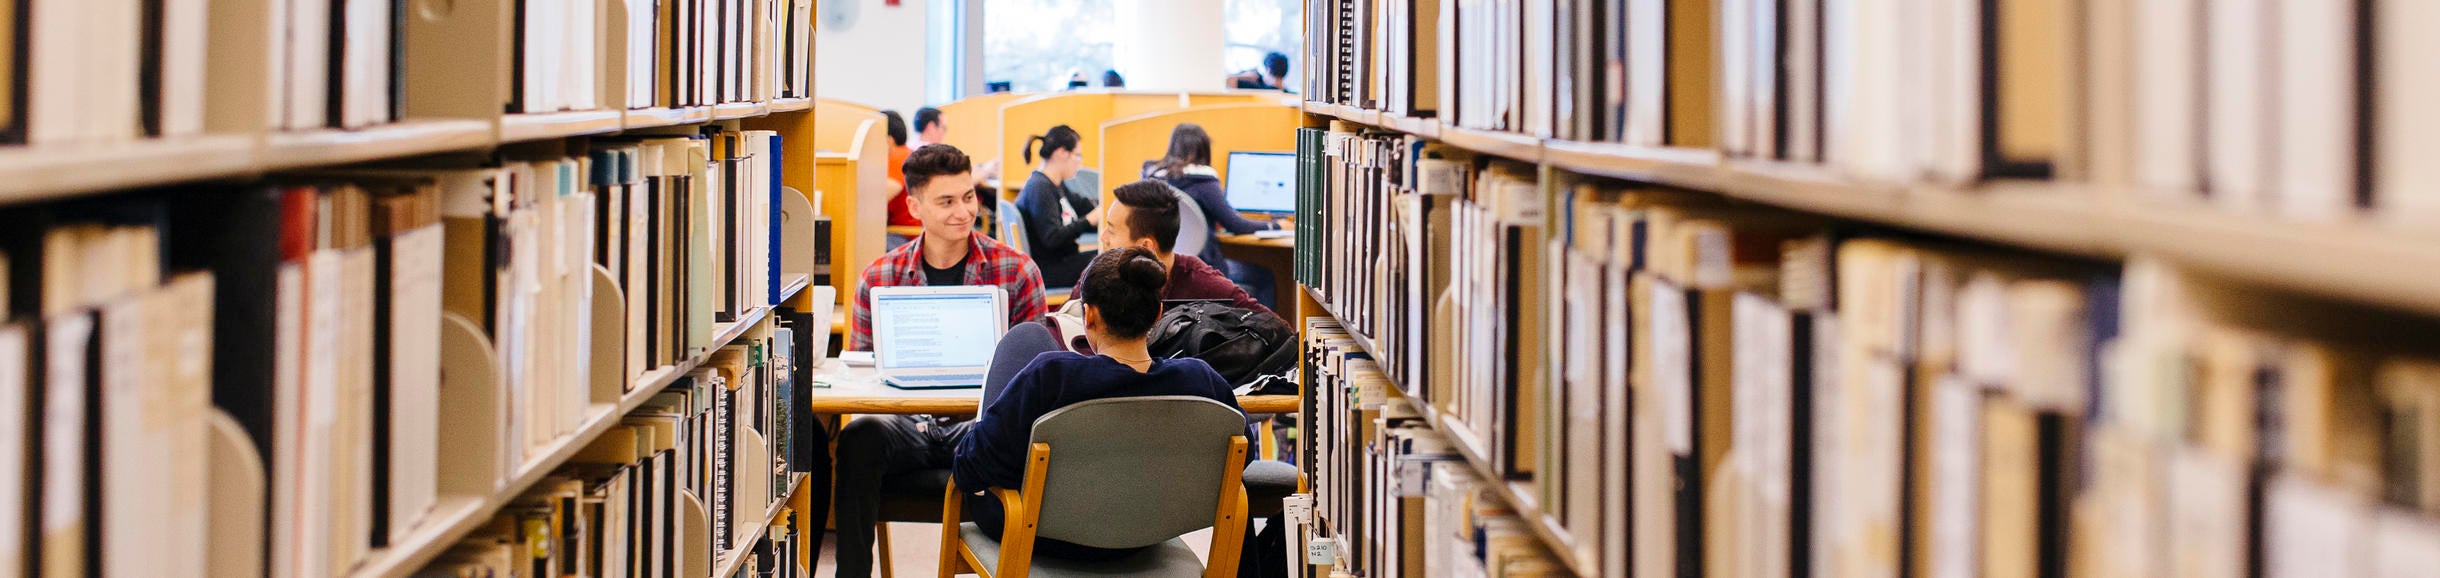 A group of students studies together at a table in the library as seen from between two shelves of books.